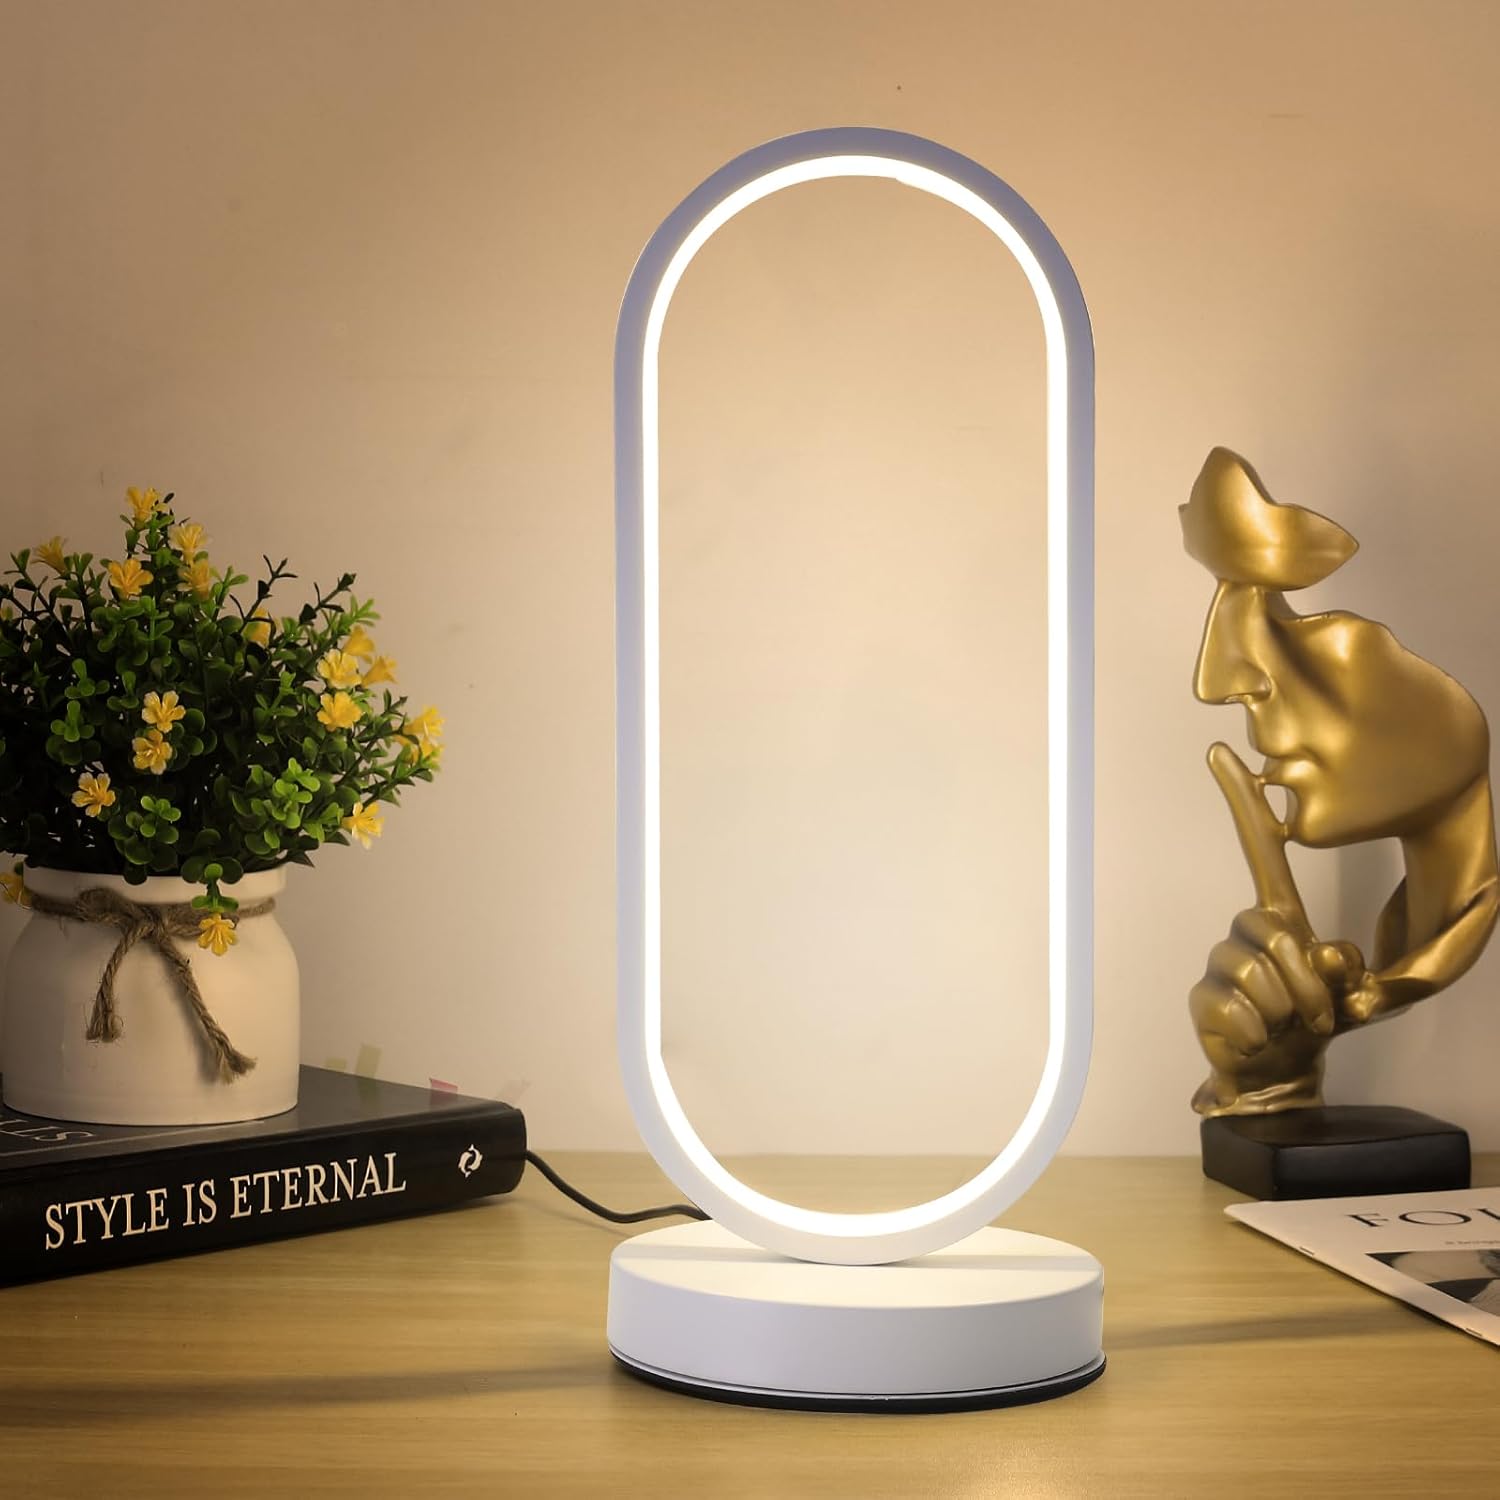 Bedside Lamp Qi Wireless Charger LED Desk Lamp with Touch Control 3 Light Hues,Table Lamp Eye-Caring Reading Light for Kids, Adults, Home, Dorm and Office,Wireless Charge for All Qi Devices